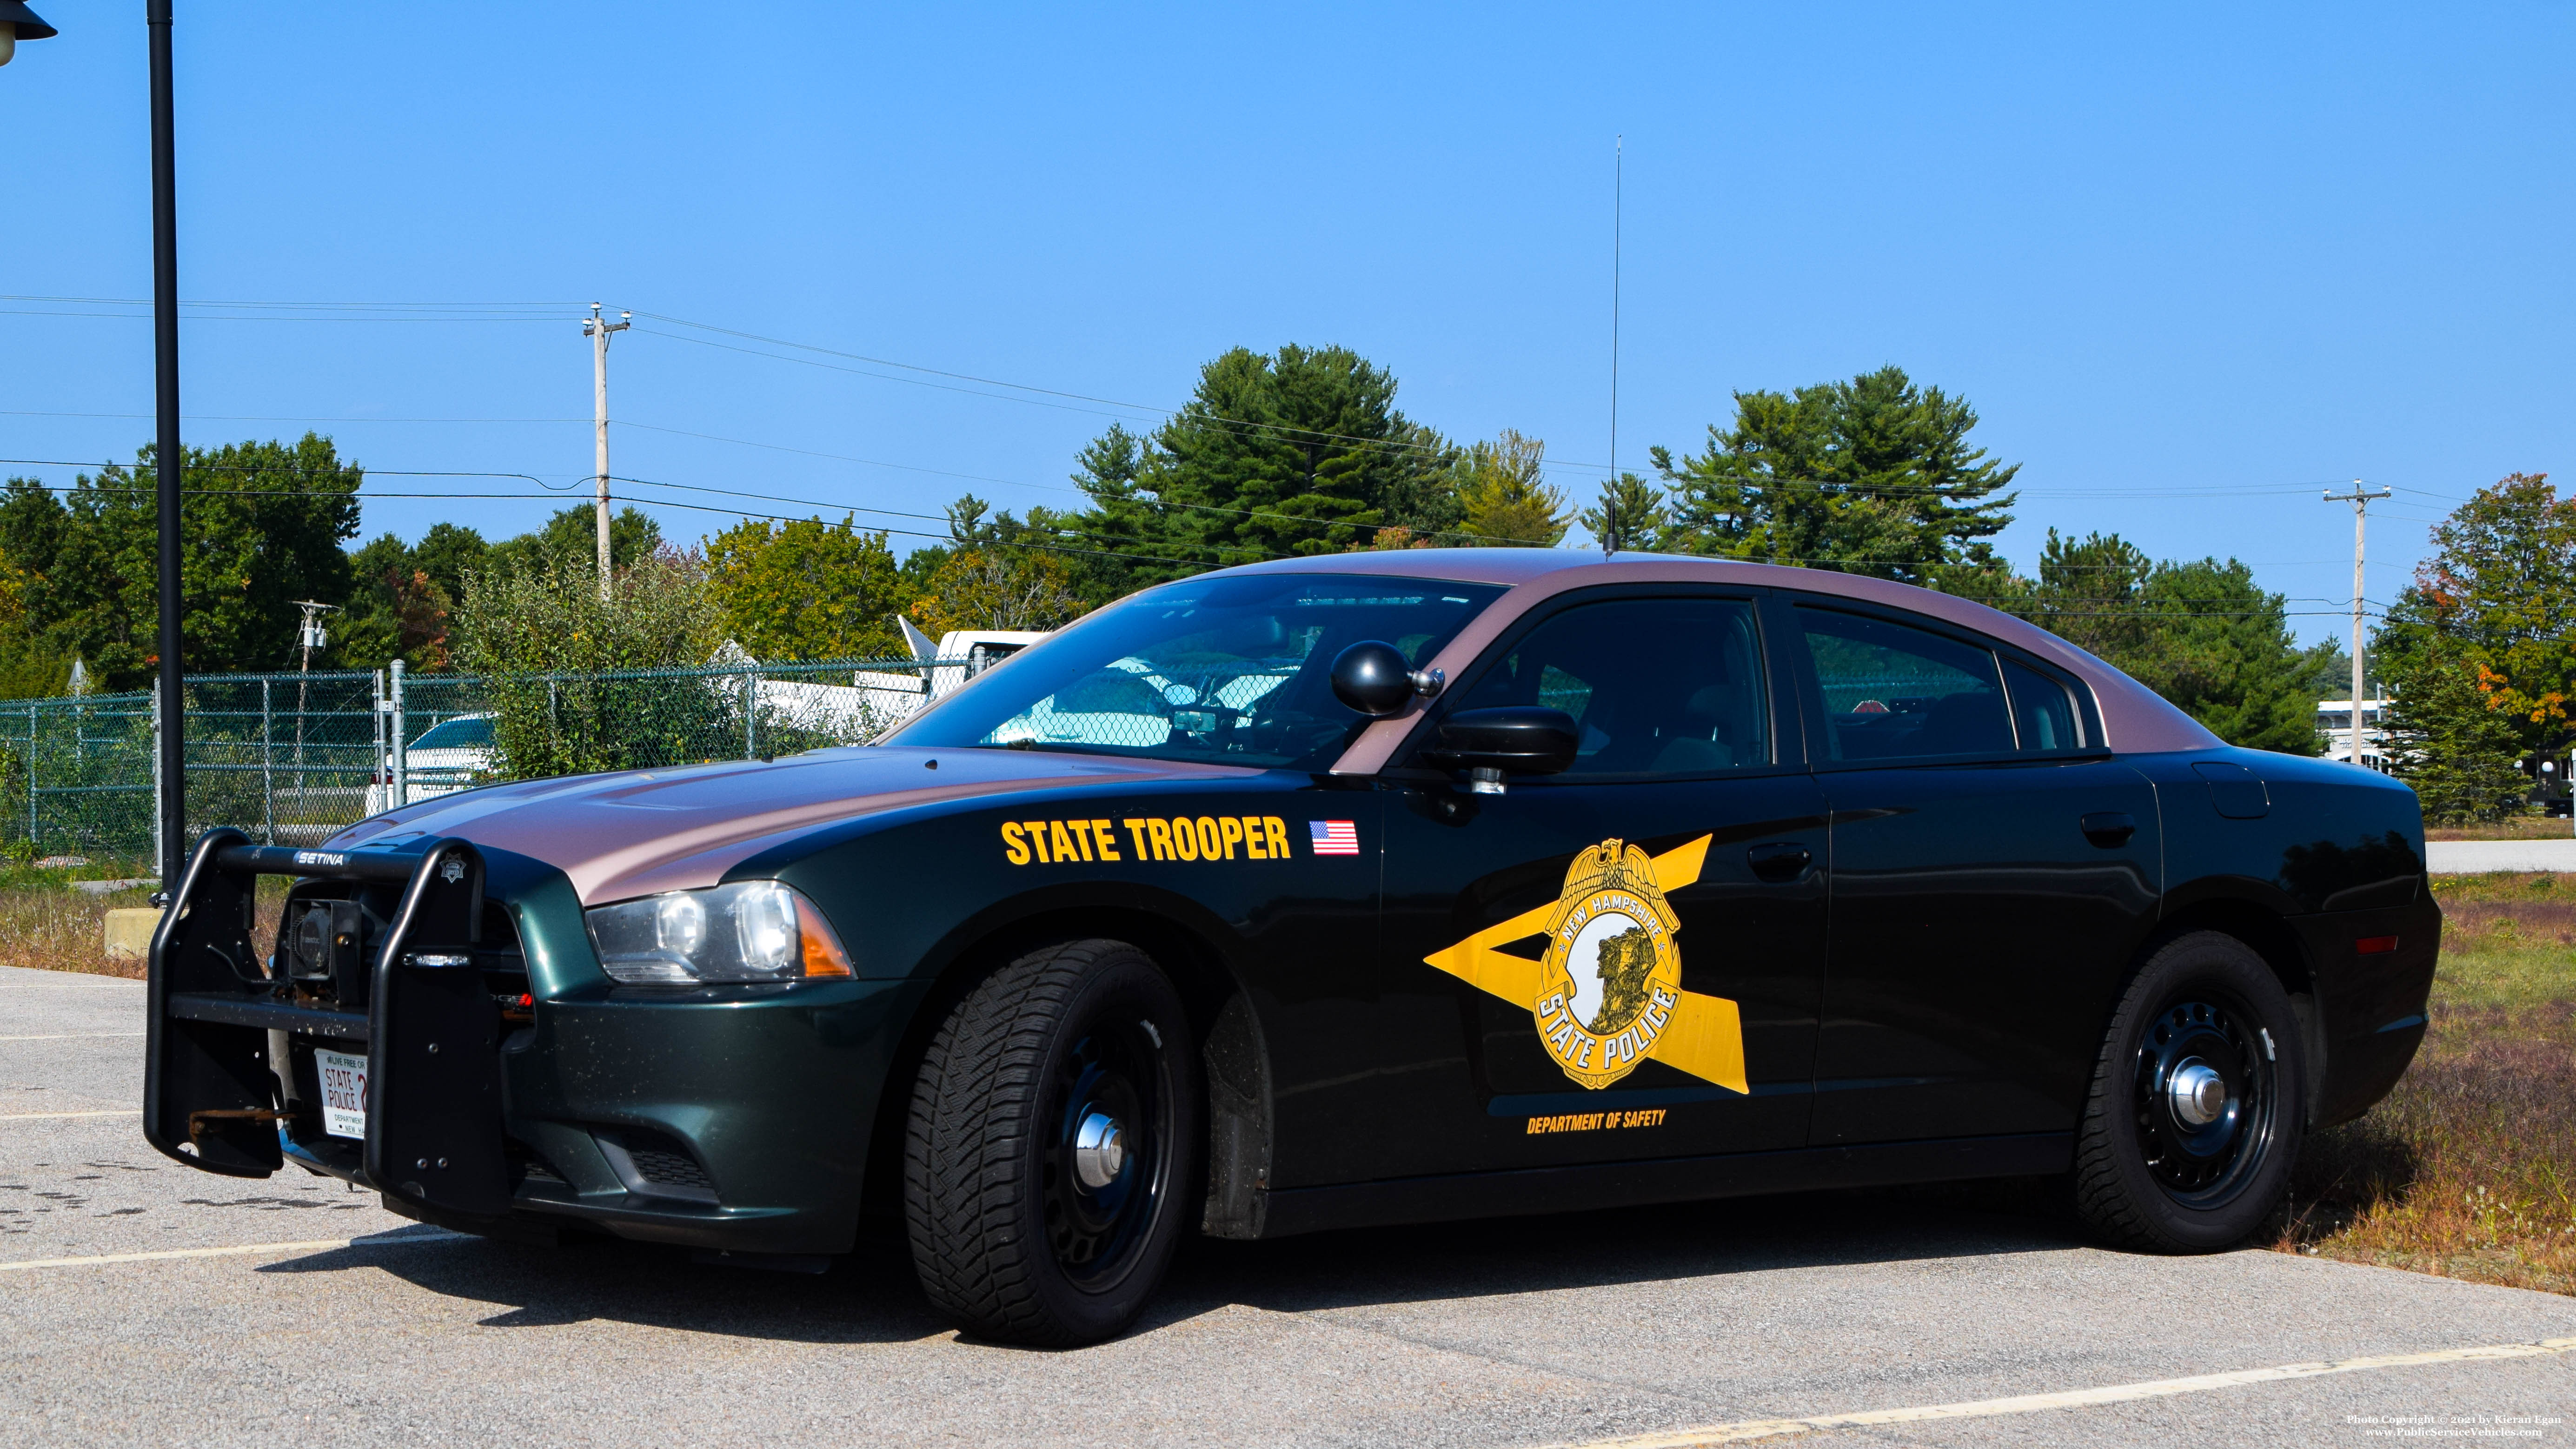 A photo  of New Hampshire State Police
            Cruiser 297, a 2014 Dodge Charger             taken by Kieran Egan